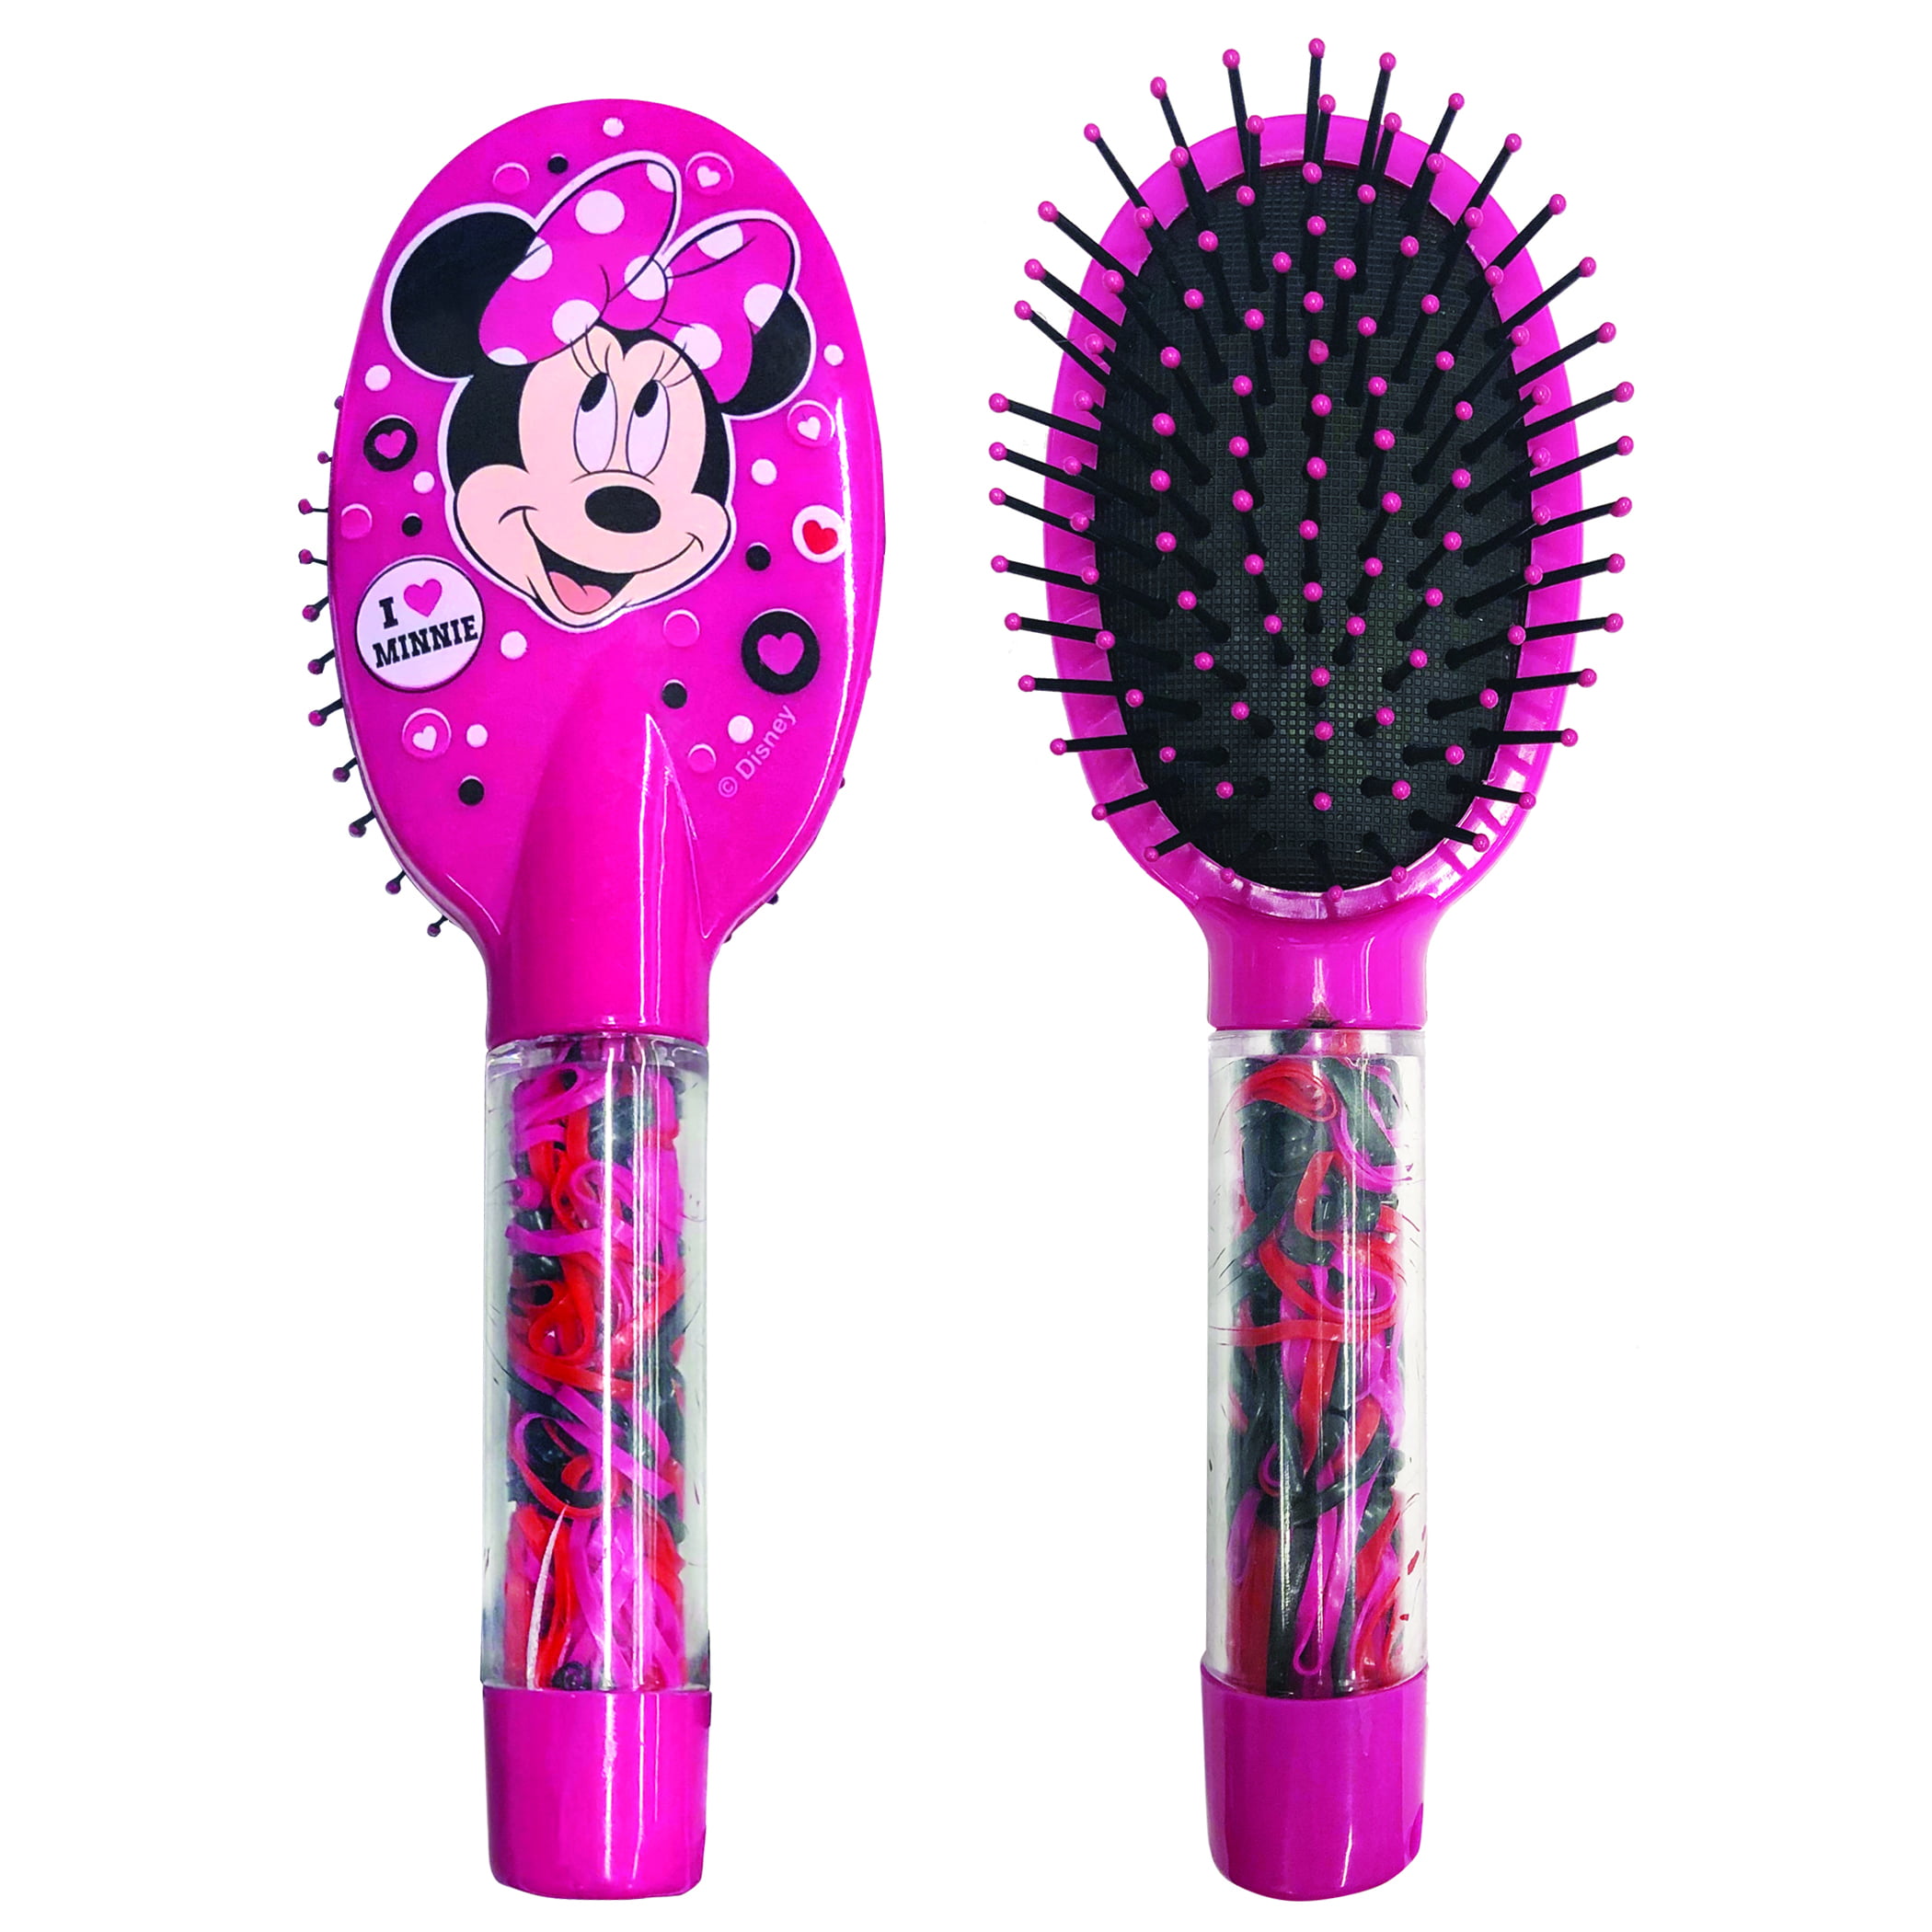 Disney's Minnie Mouse Hair Brush with Elastics, Pink 